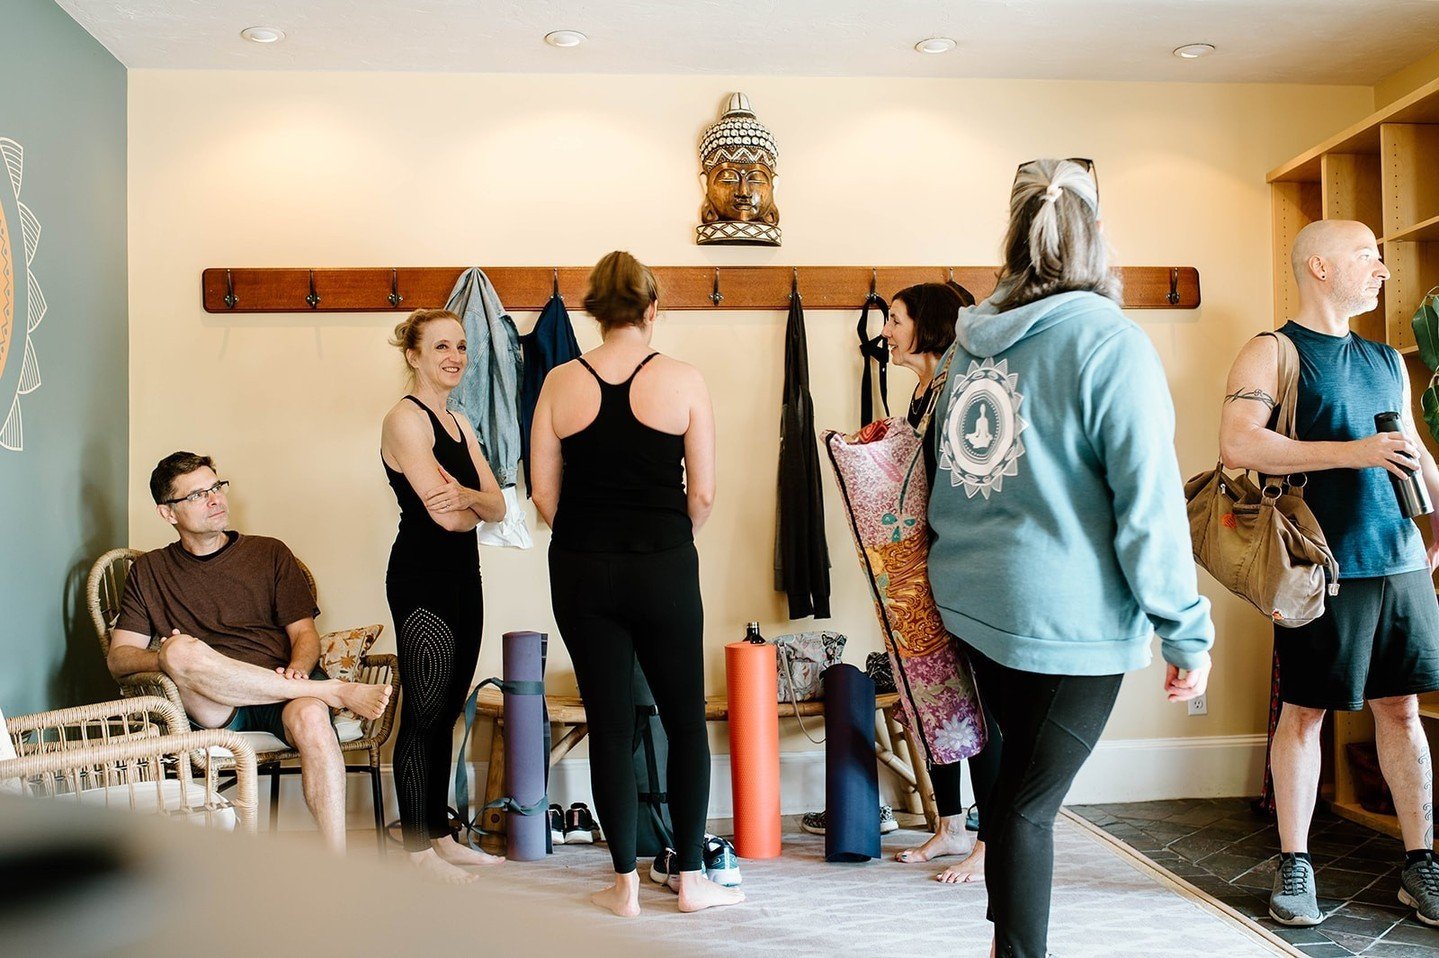 Everyone is welcome here🫶⁠
⁠
New to the studio? For just $49, new students receive access to unlimited classes at our little gem of a studio for one whole month.⁠
⁠
Whether you are a beginner or an experienced yogi, our instructors will support you 